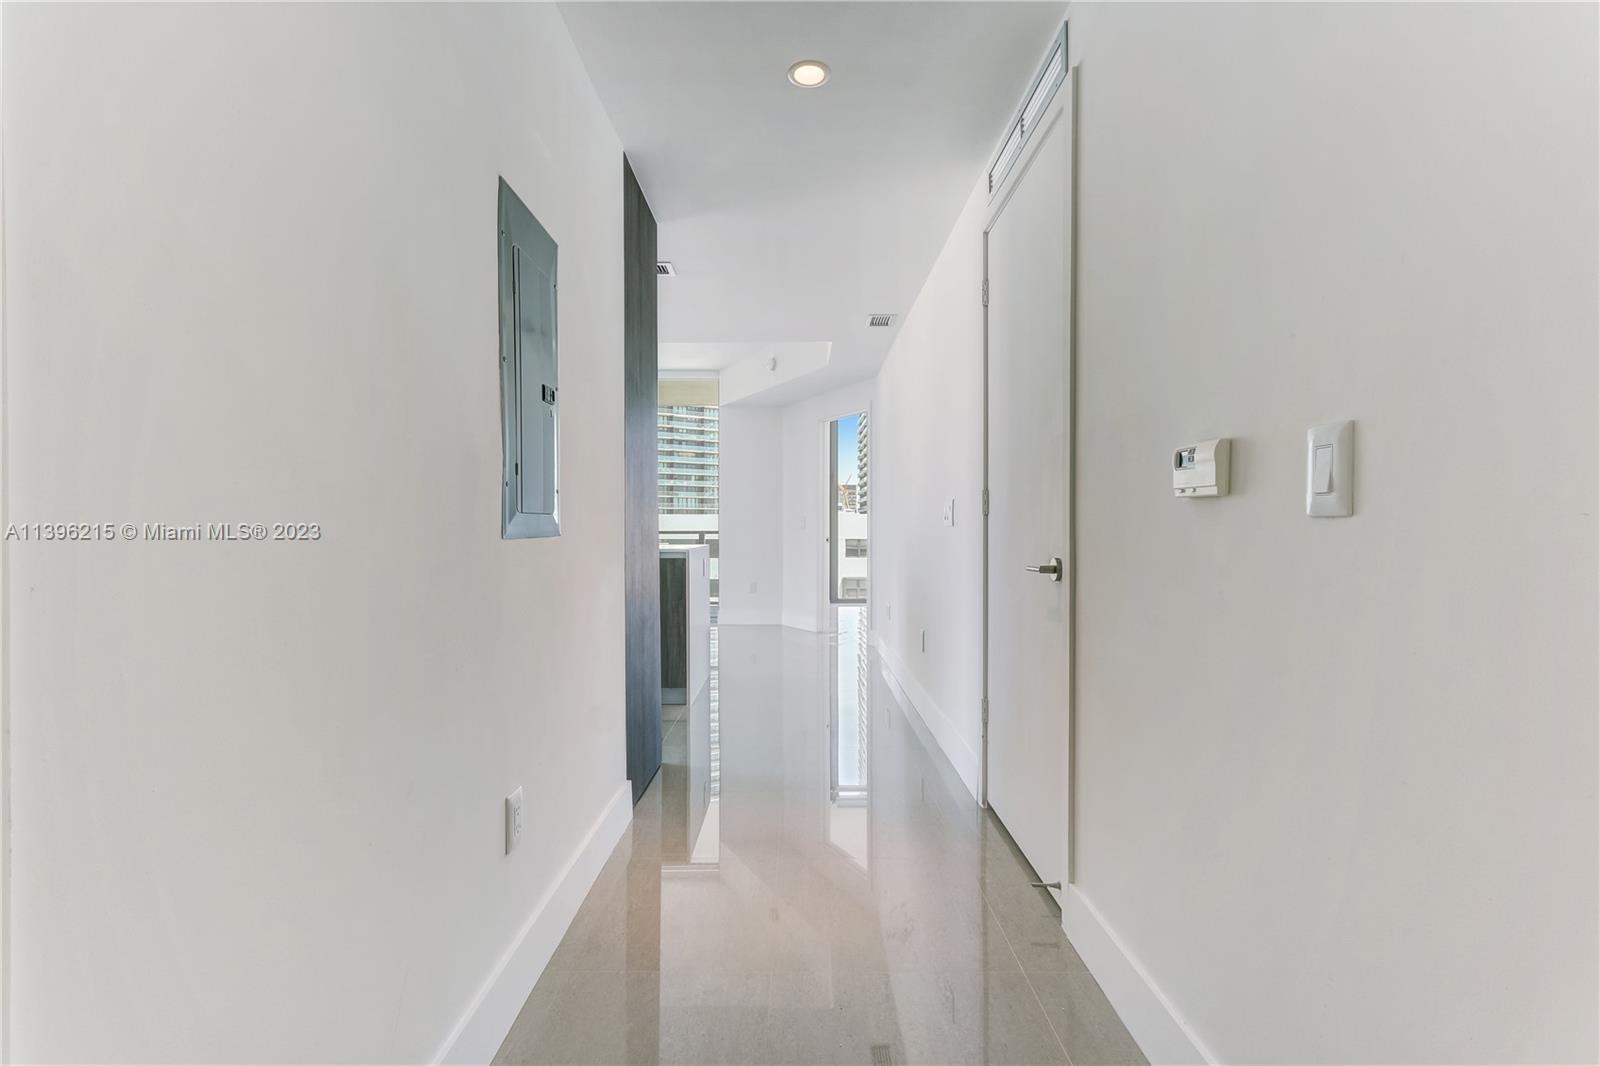 a view of a hallway with a white walls